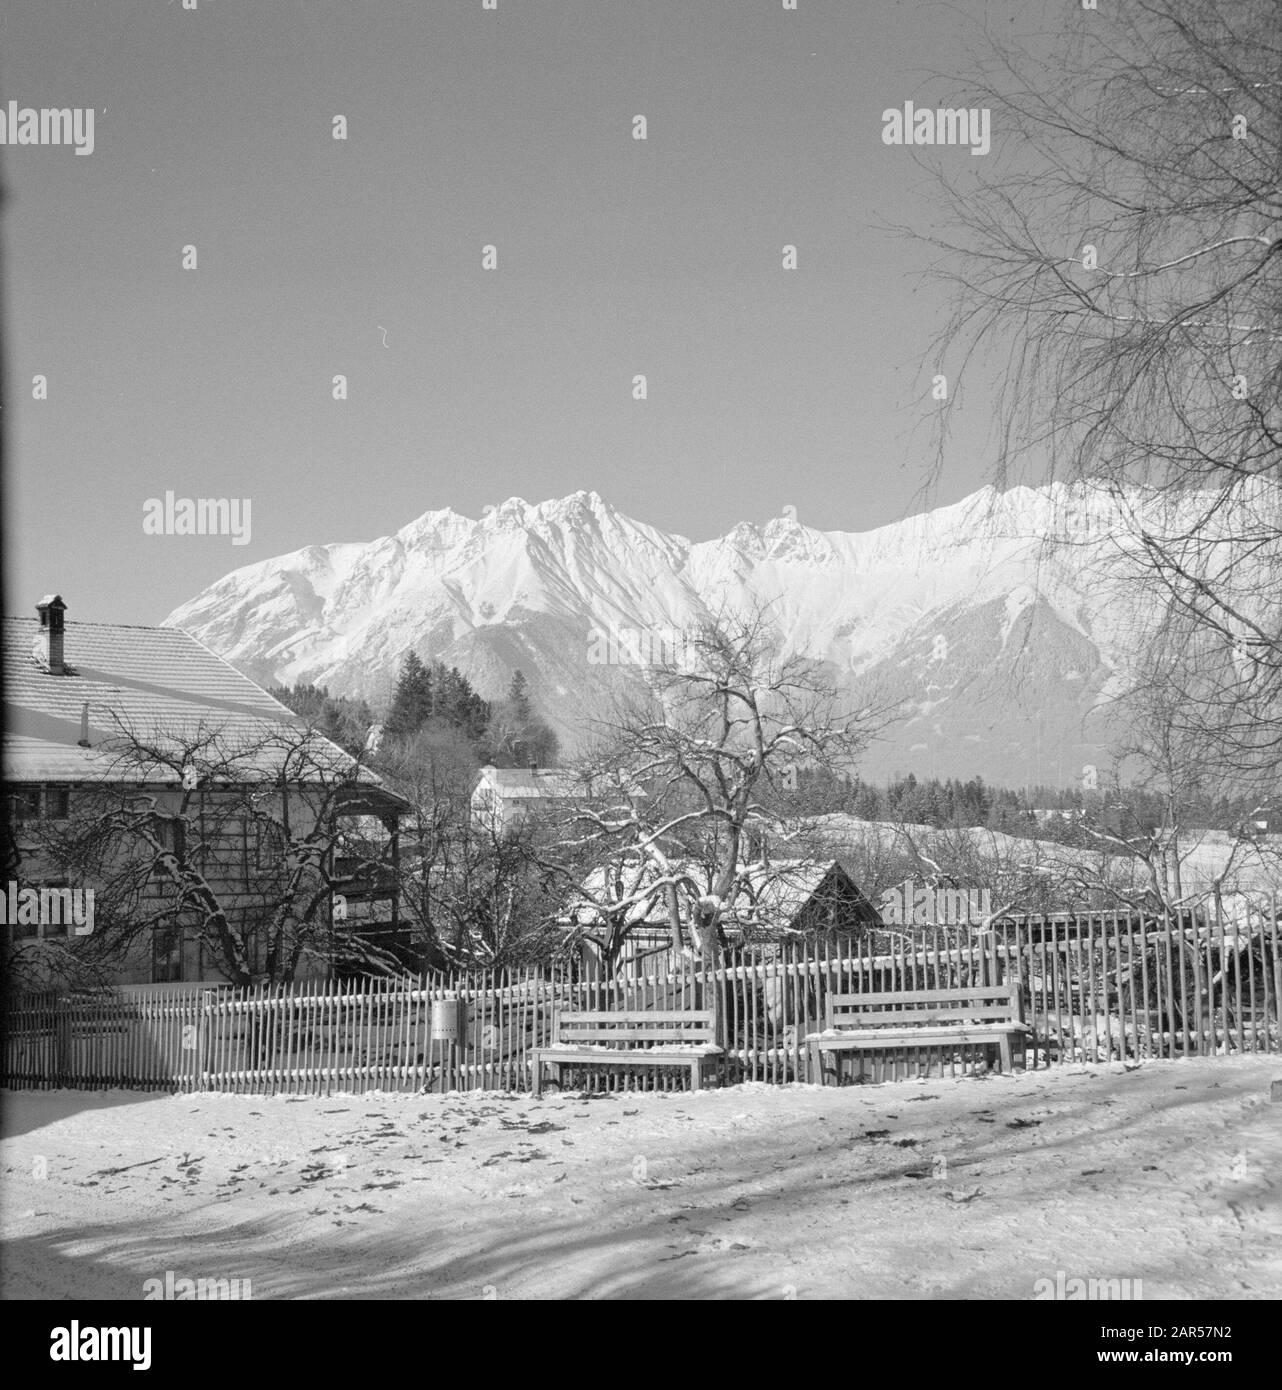 Winter in Tyrol  The Karwendel Mountains seen from a street in Sistrans Date: January 1960 Location: Austria, Sistrans, Tyrol Keywords: mountains, villages, landscapes, snow, winter, homes Stock Photo